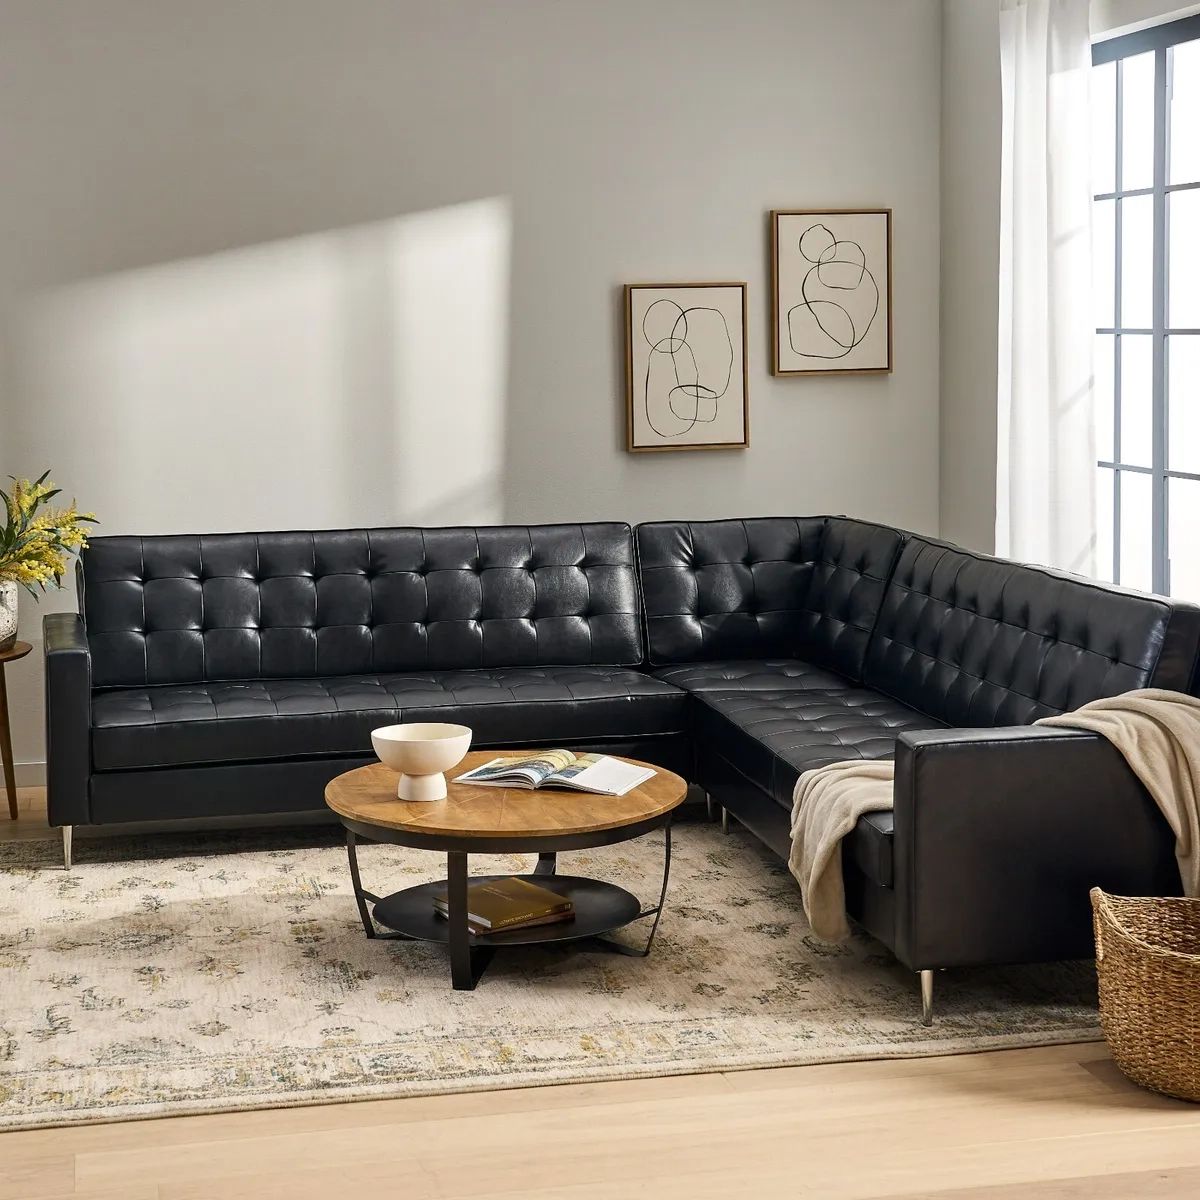 Goliath Contemporary Faux Leather Tufted 5 Seater Sectional Sofa Set | Ebay Regarding Faux Leather Sectional Sofa Sets (Photo 1 of 15)